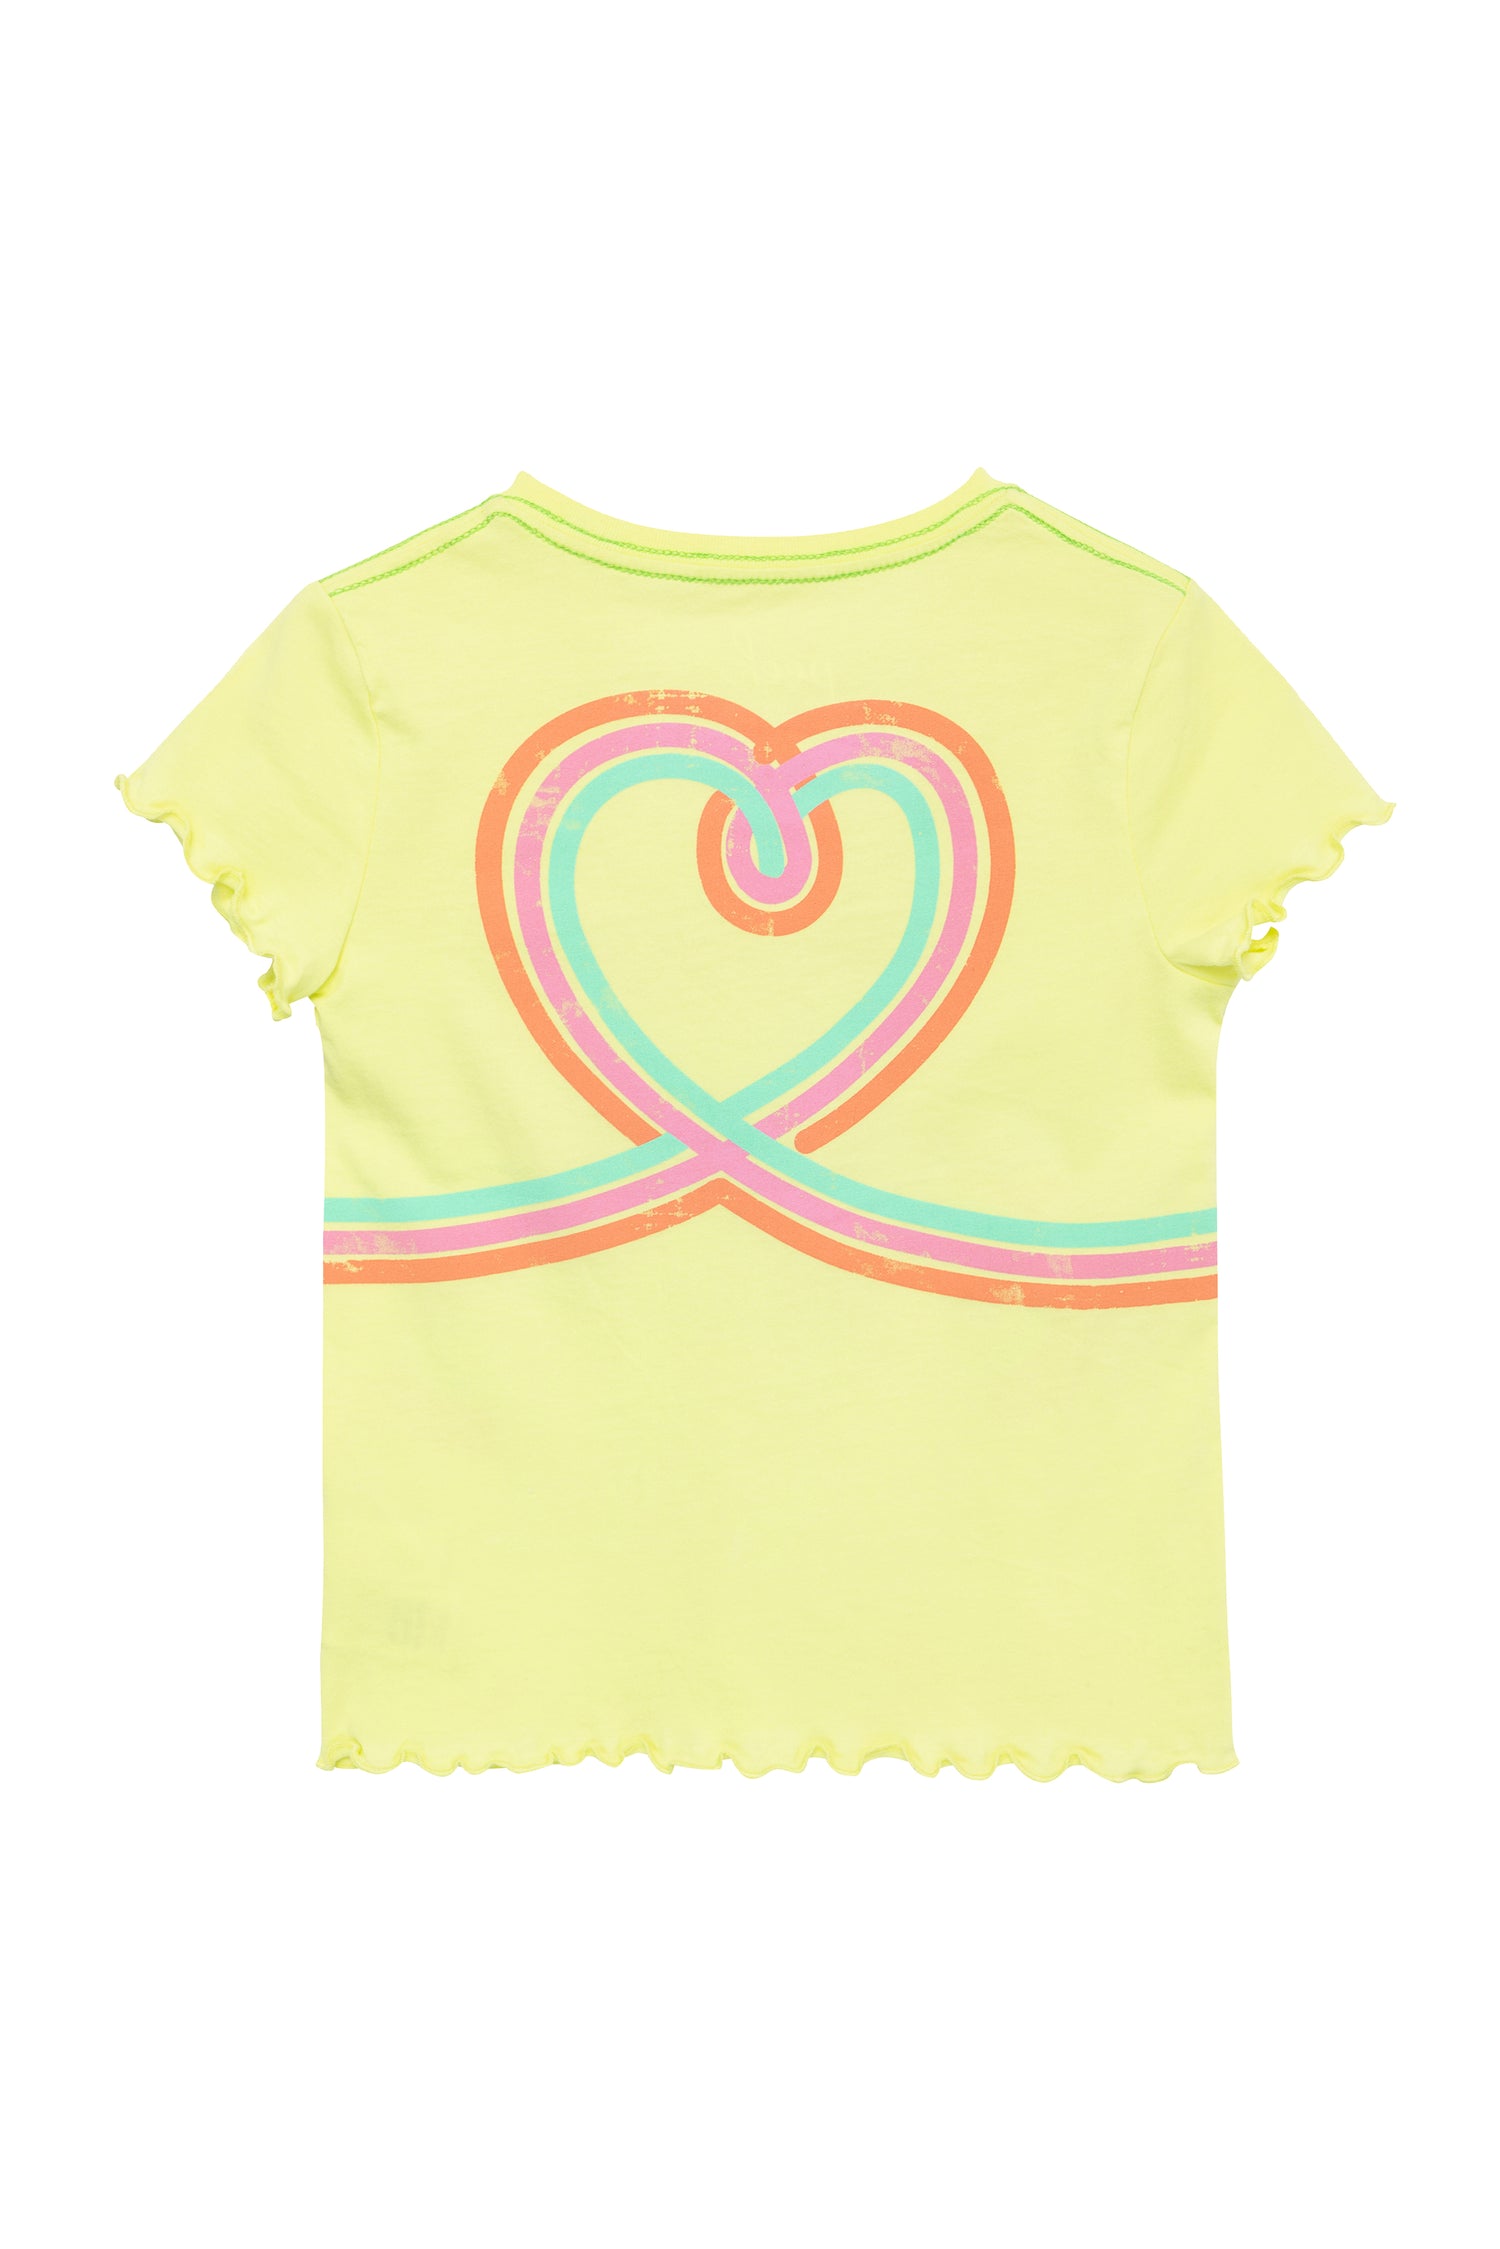 BACK OF YELLOW T-SHIRT WITH HEART GRAPHIC